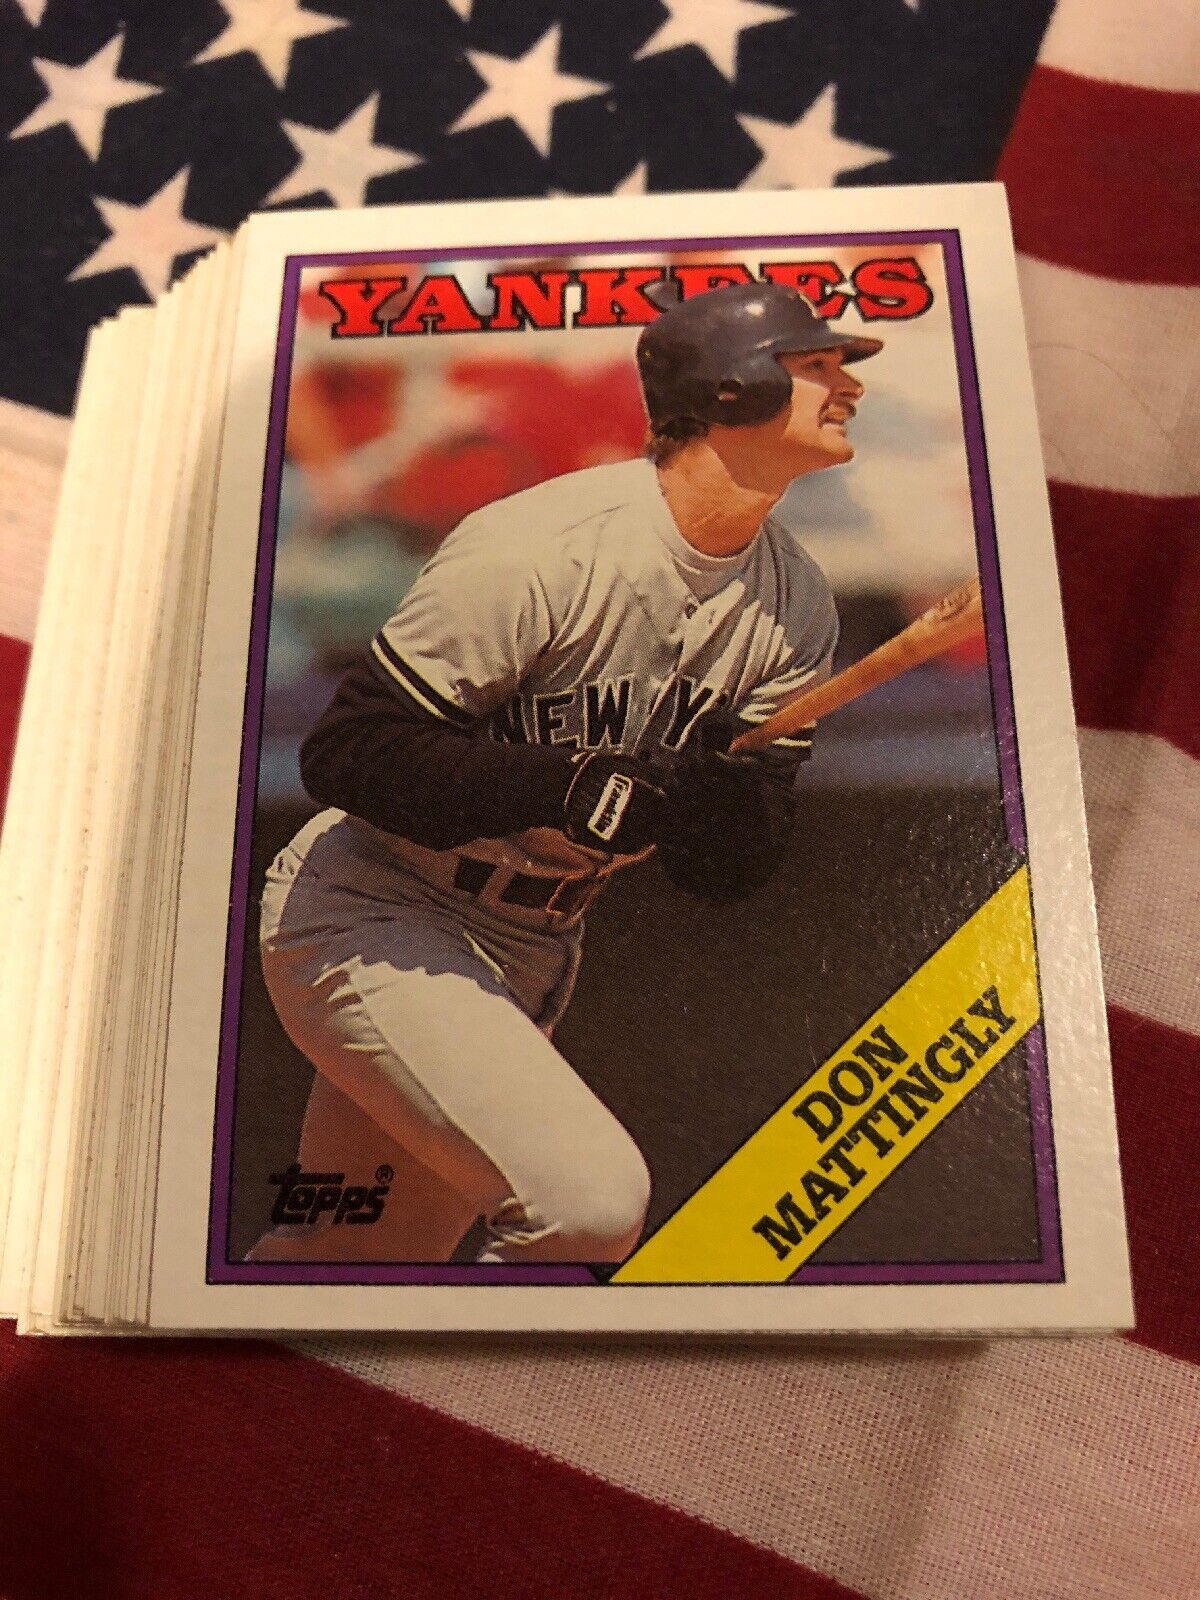 1988 Topps Yankees Team Set With Don Mattingly